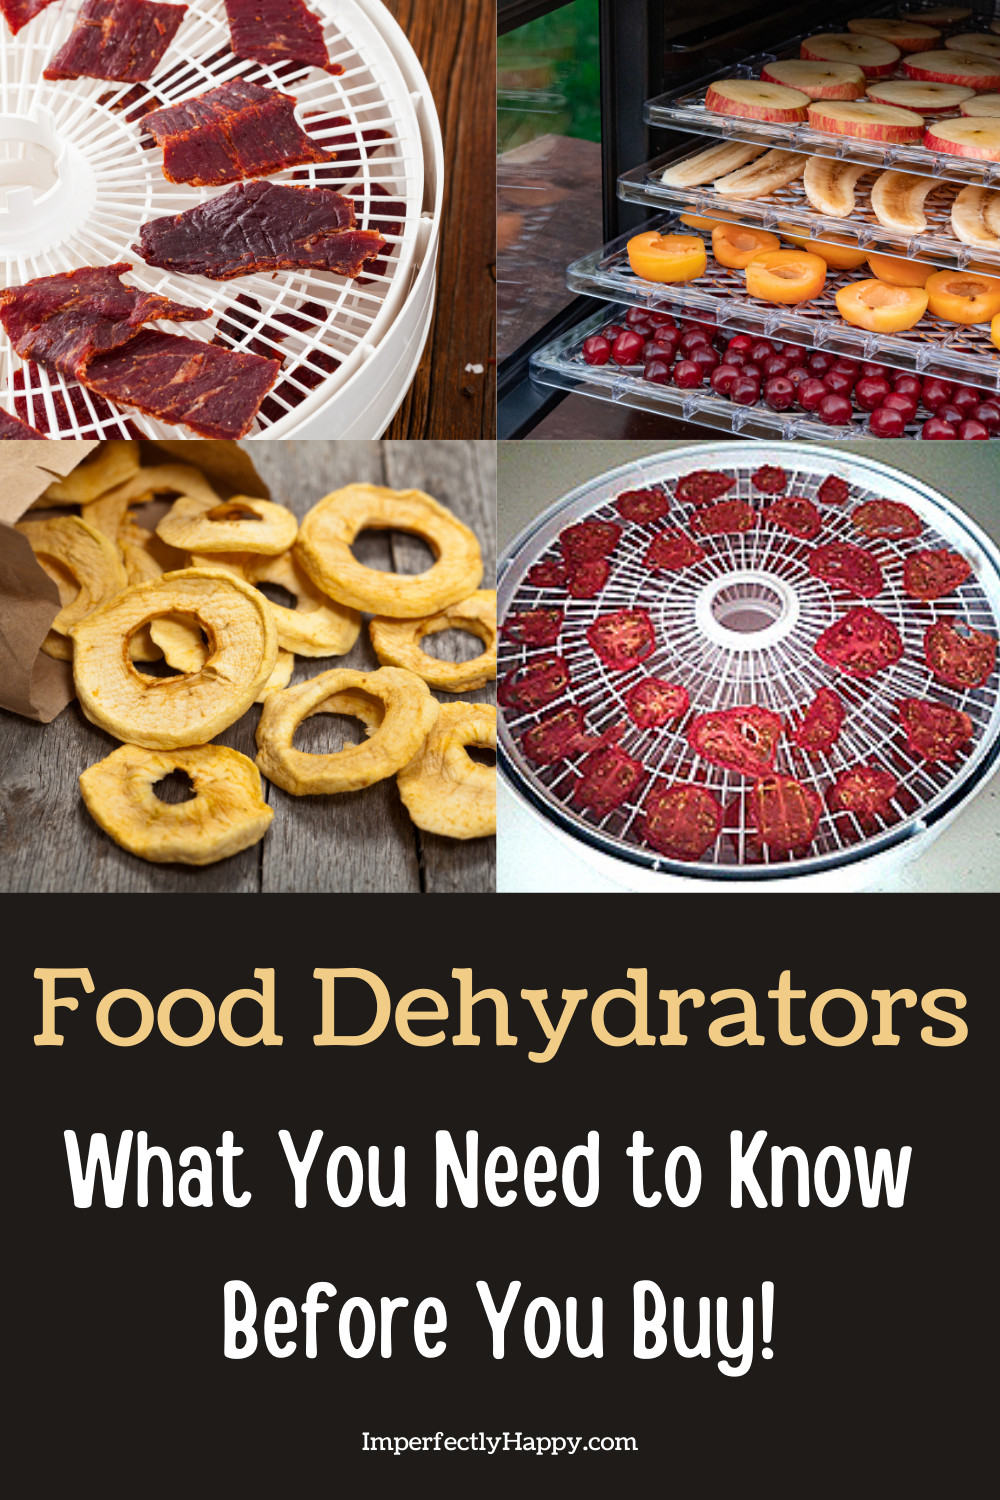 Food Dehydrators what you need to know before you buy